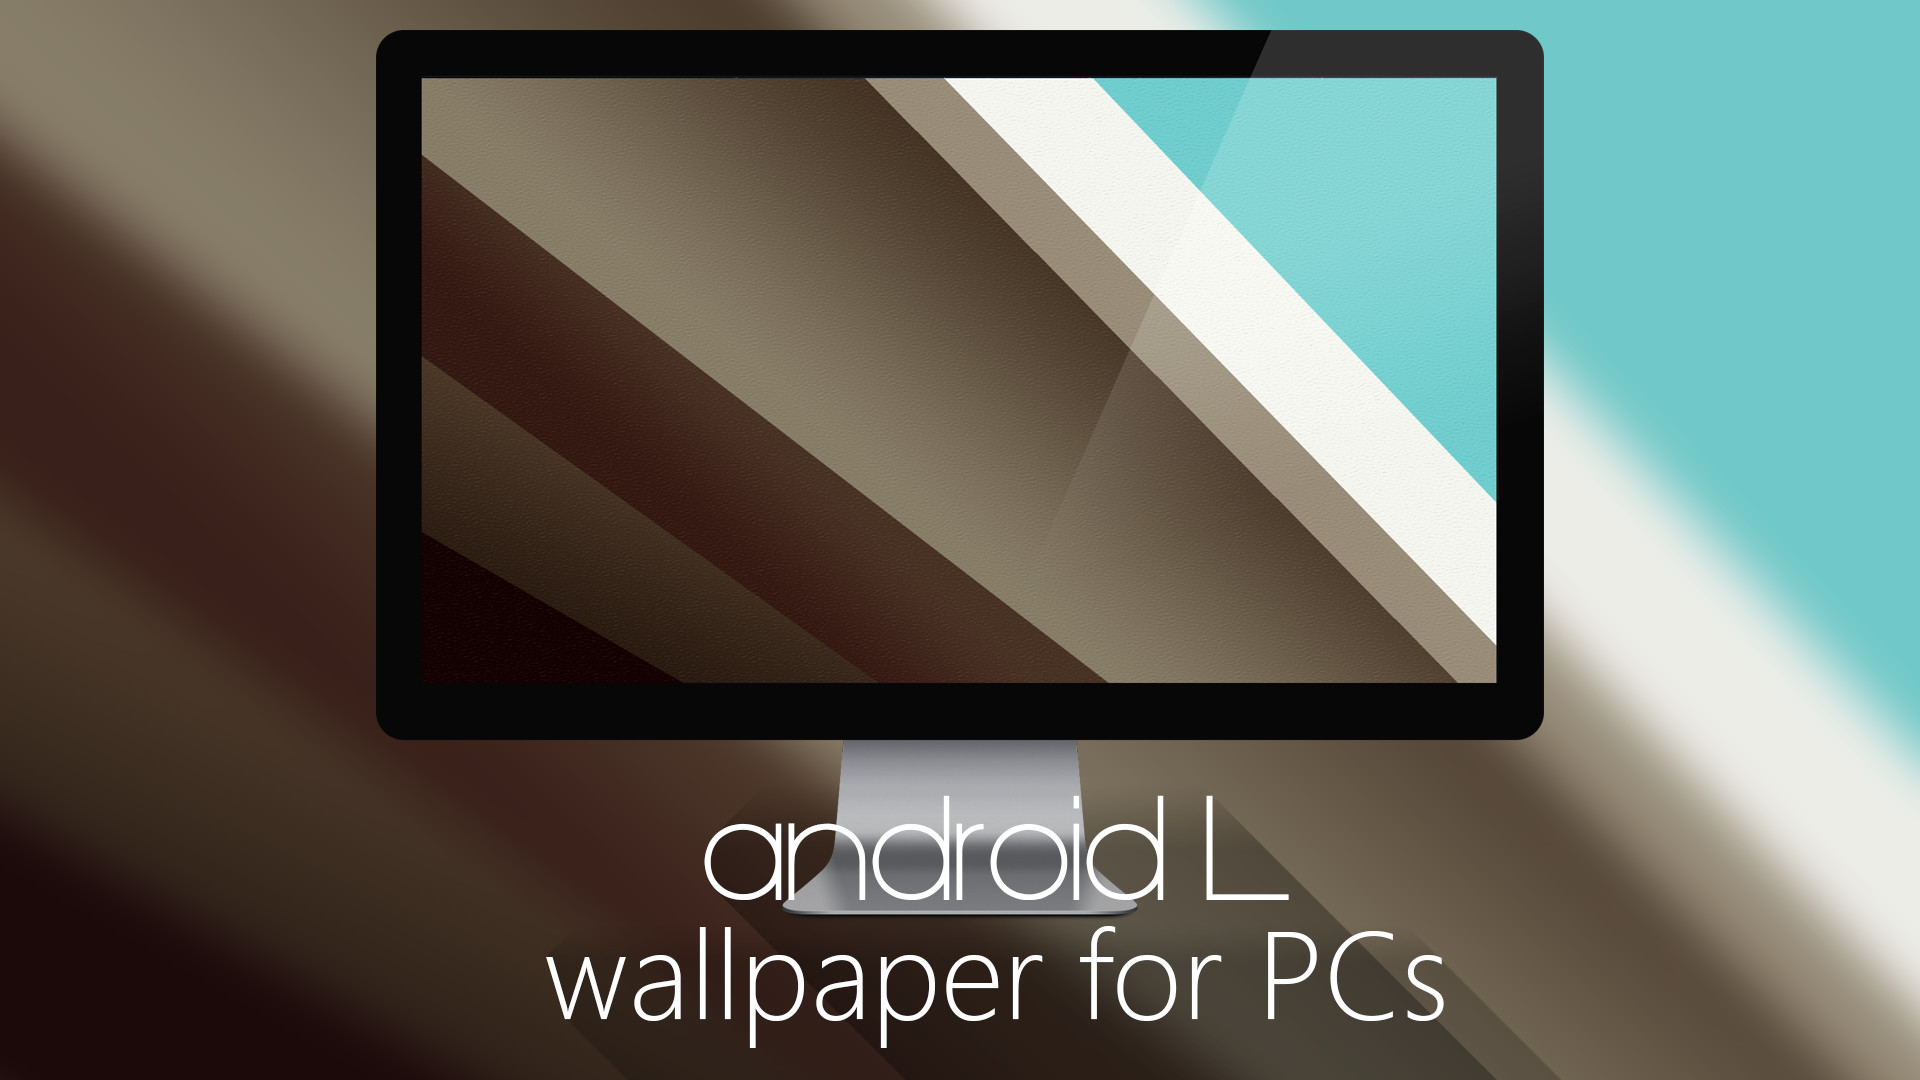 1920x1080 Android L - Wallpaper for PCs by MilesAndryPrower on DeviantArt